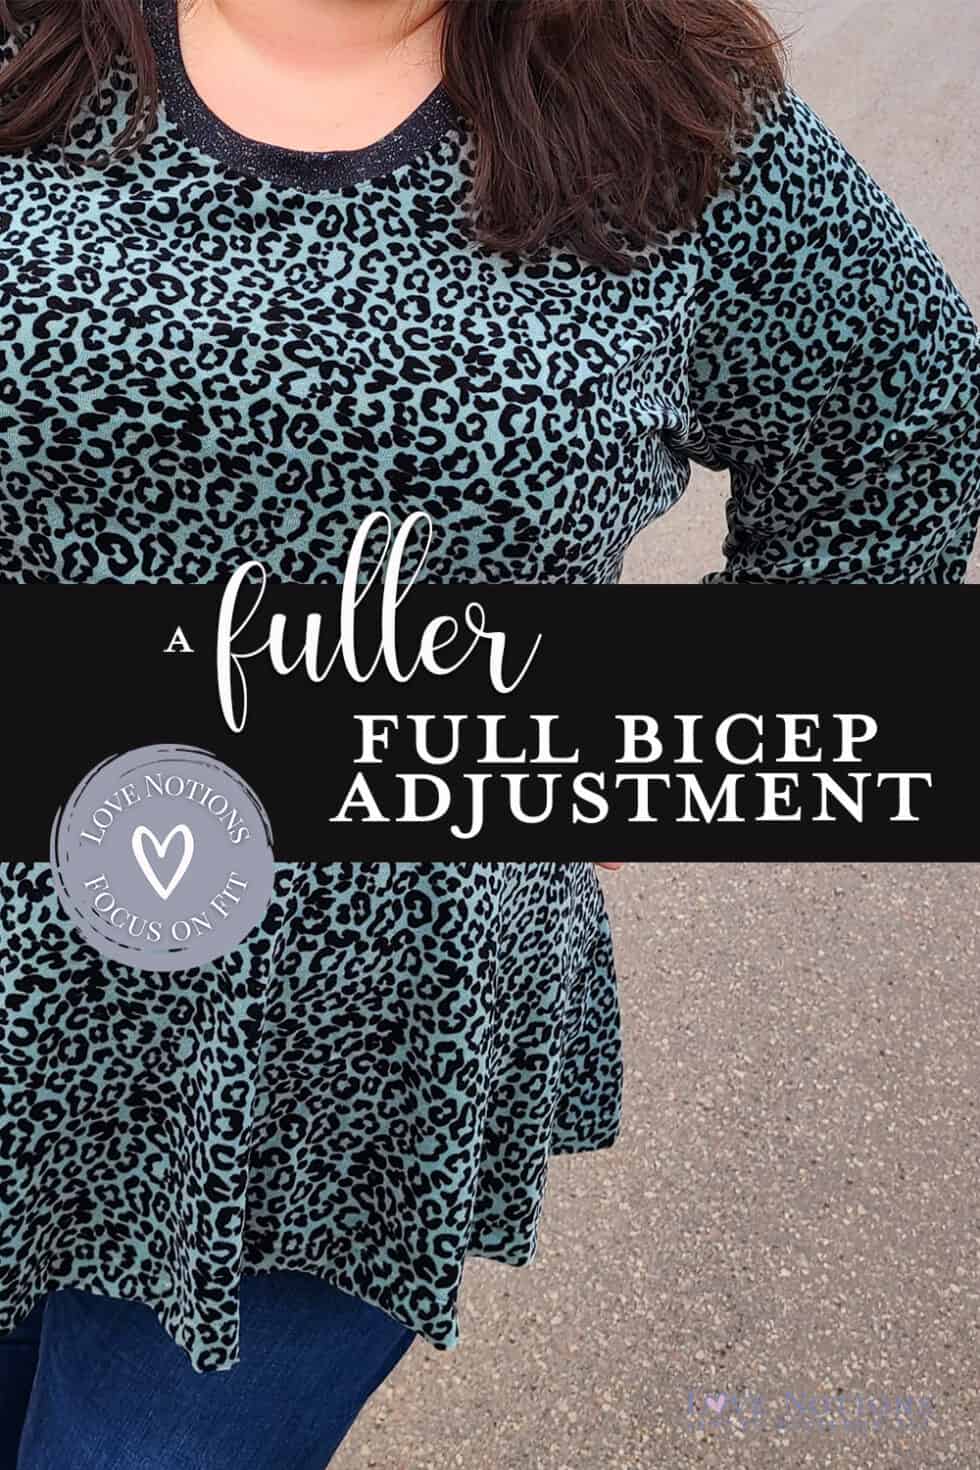 How to create a Fuller Full Bicep Adjustment: What To Do When You Need ...